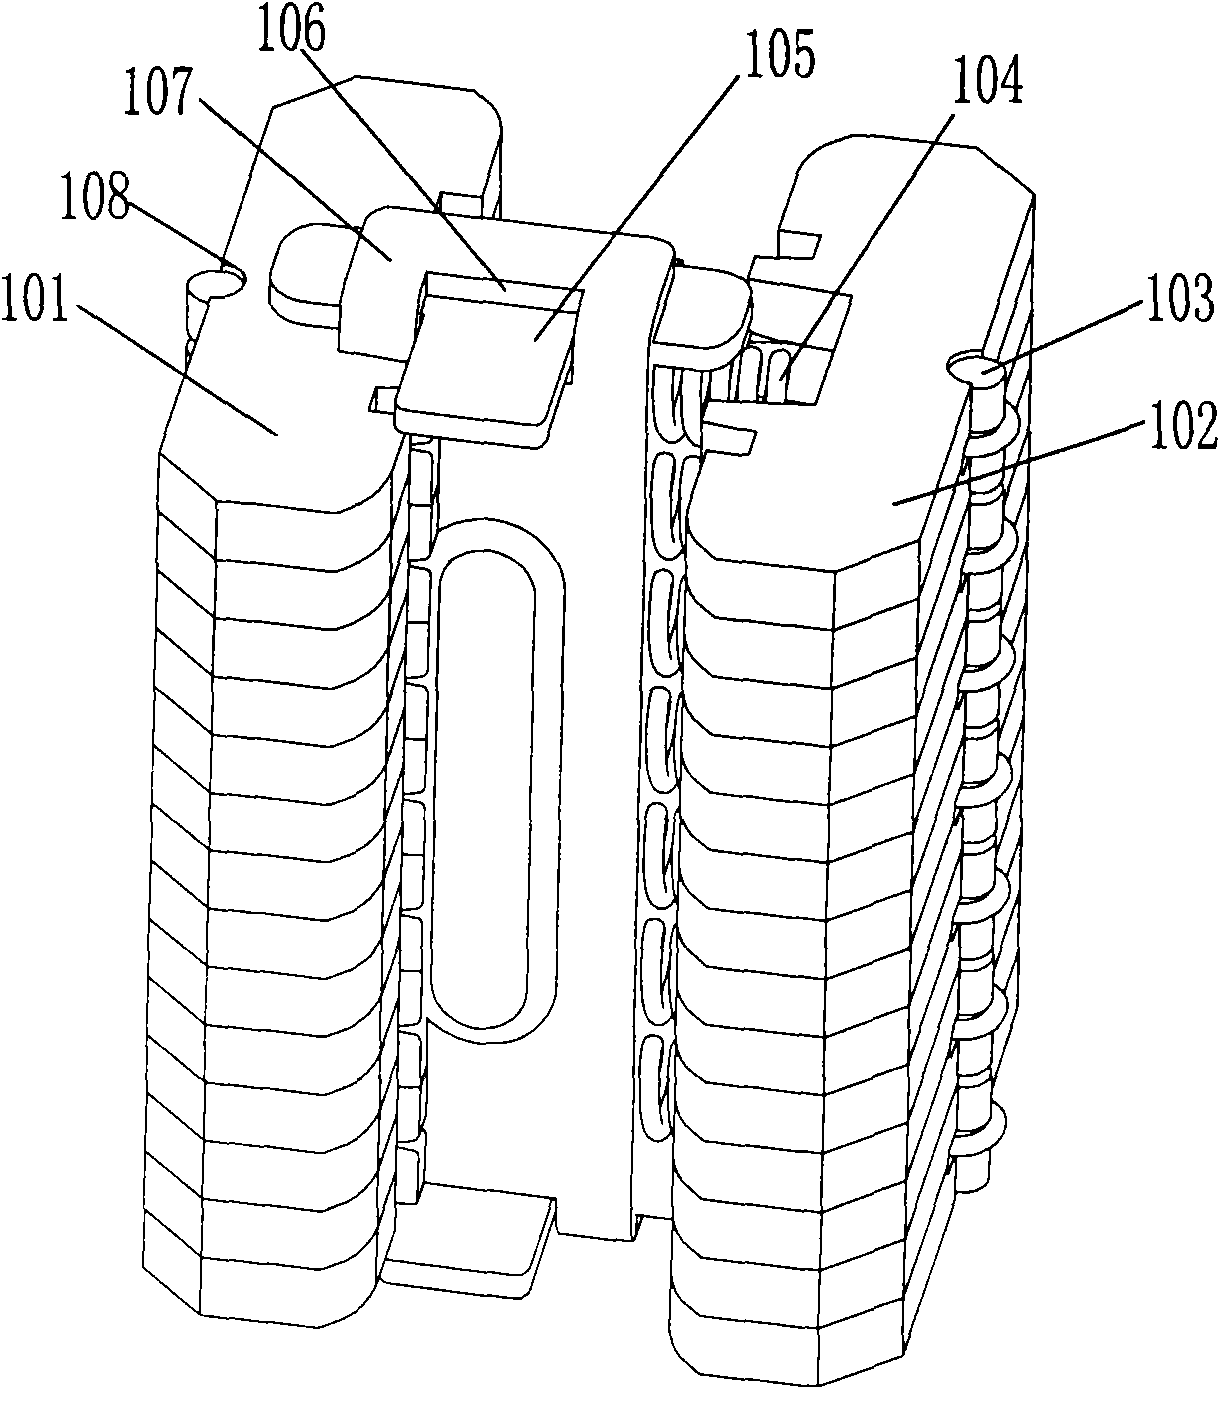 Electrical connection mechanism of plug-in breaker